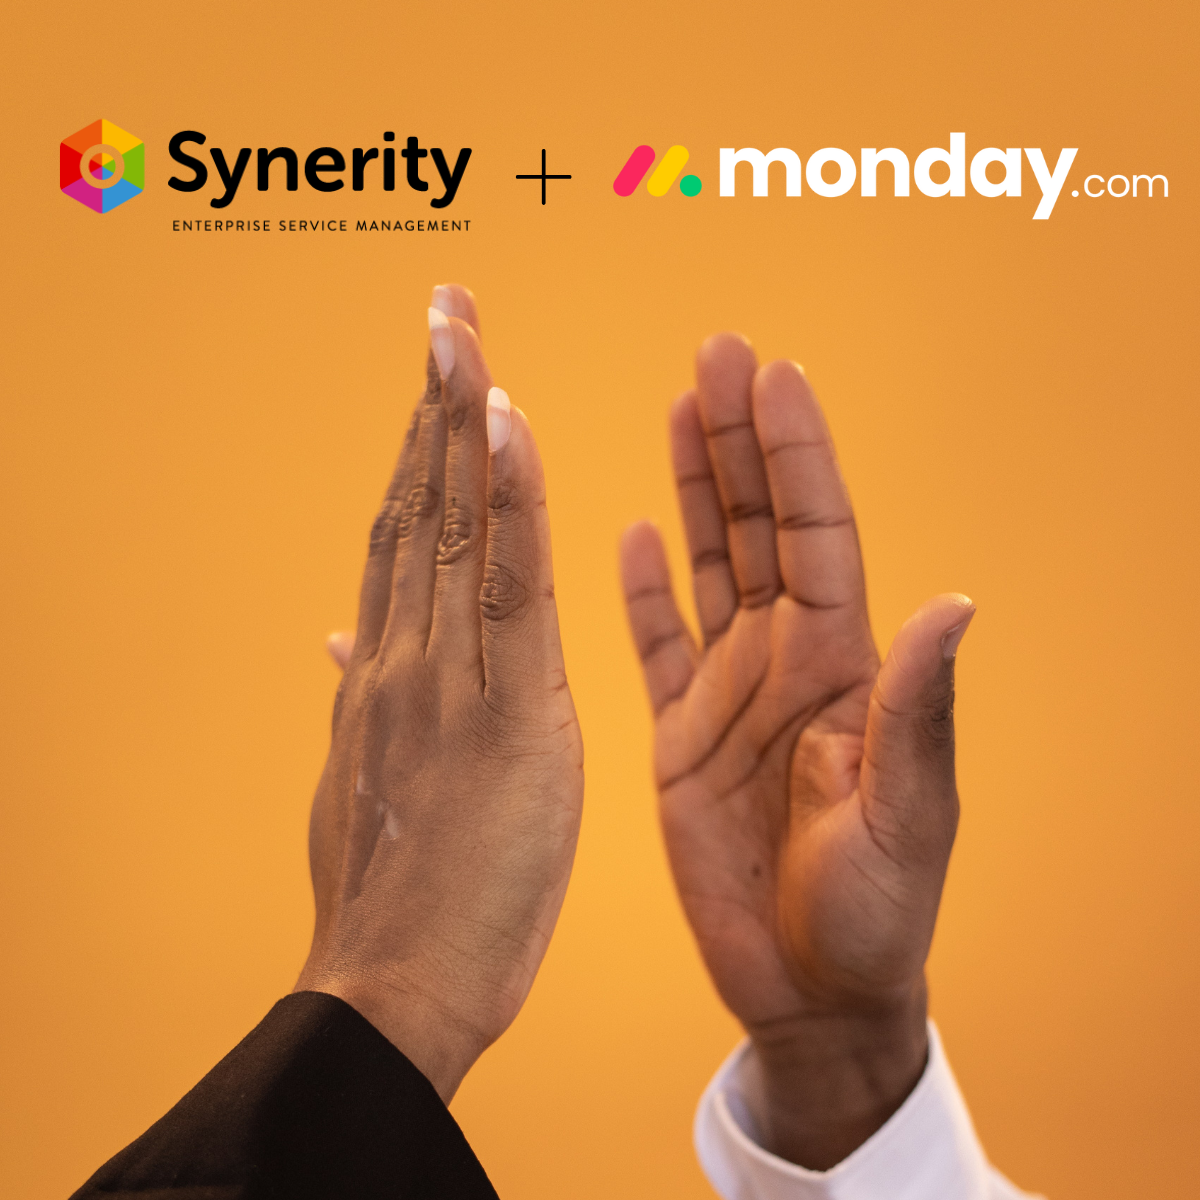 Synerity launches partnership with monday.com